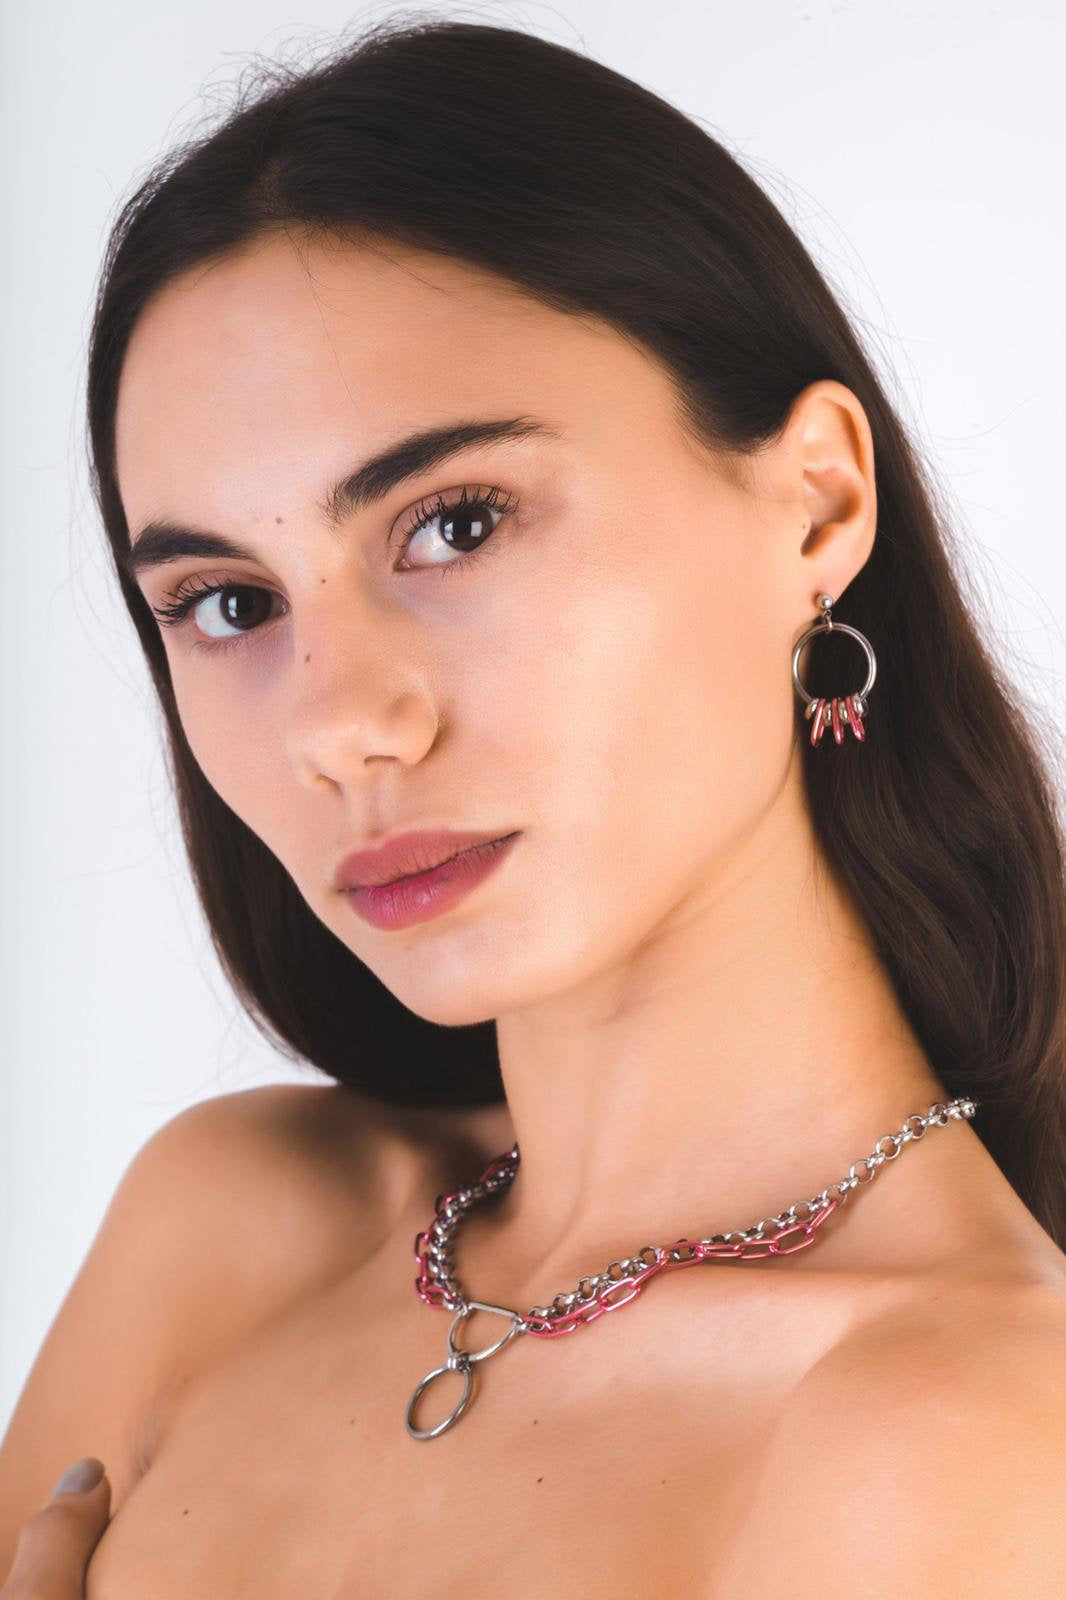 A model showcases Myril Jewels' neo-goth flair with silver hoop earrings featuring elegant pink details, complemented by a matching avant-garde chain necklace. This set is perfect for gothic fashion enthusiasts and adds a bold touch to any dark-avantgarde, Witchcore, or festival ensemble